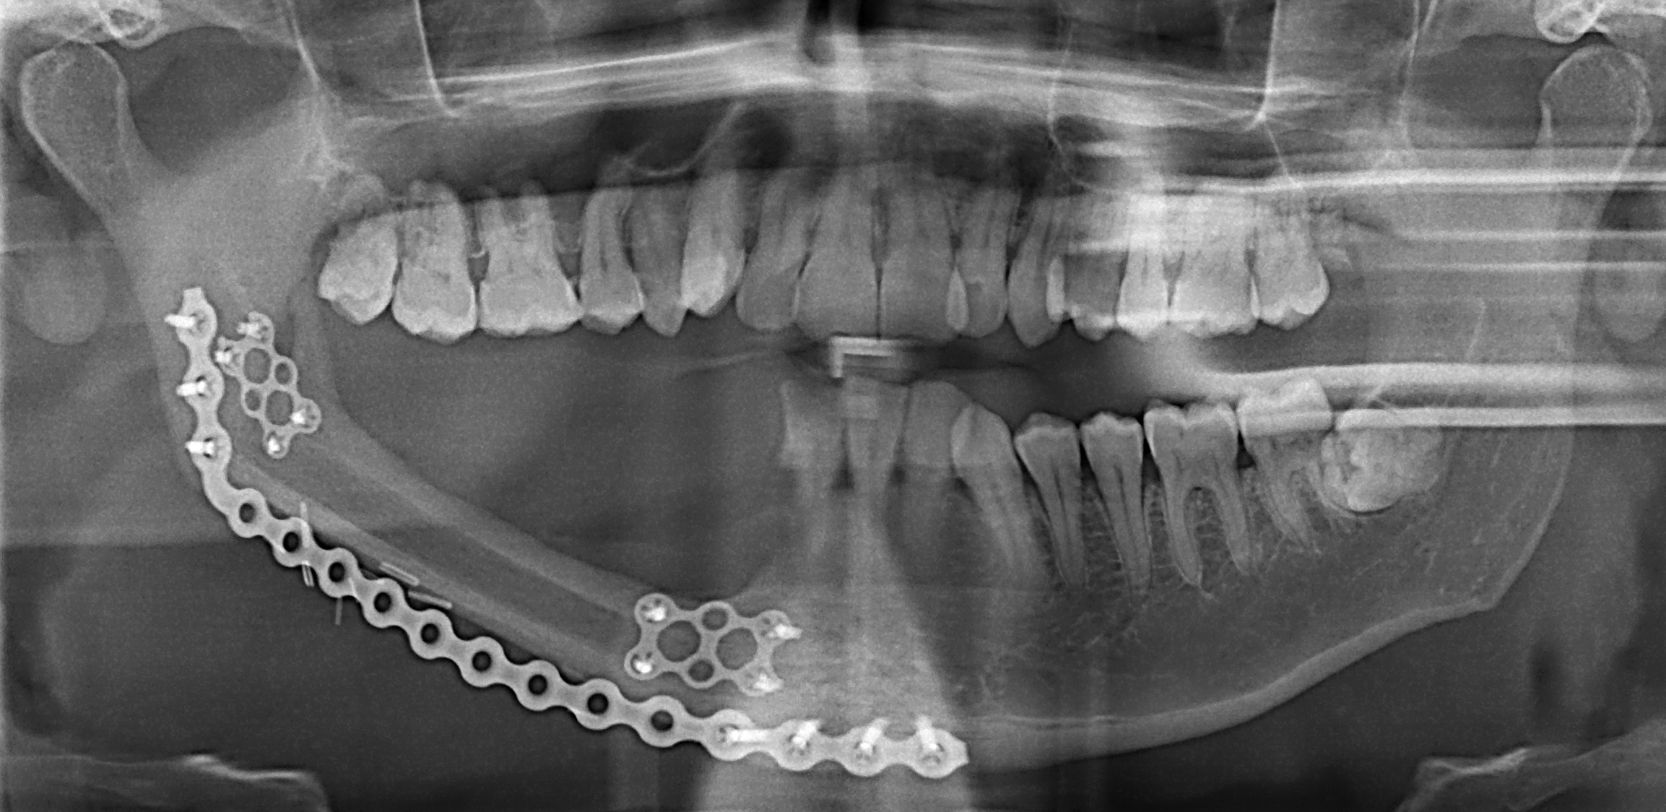 Bone reconstruction options for the Mandible